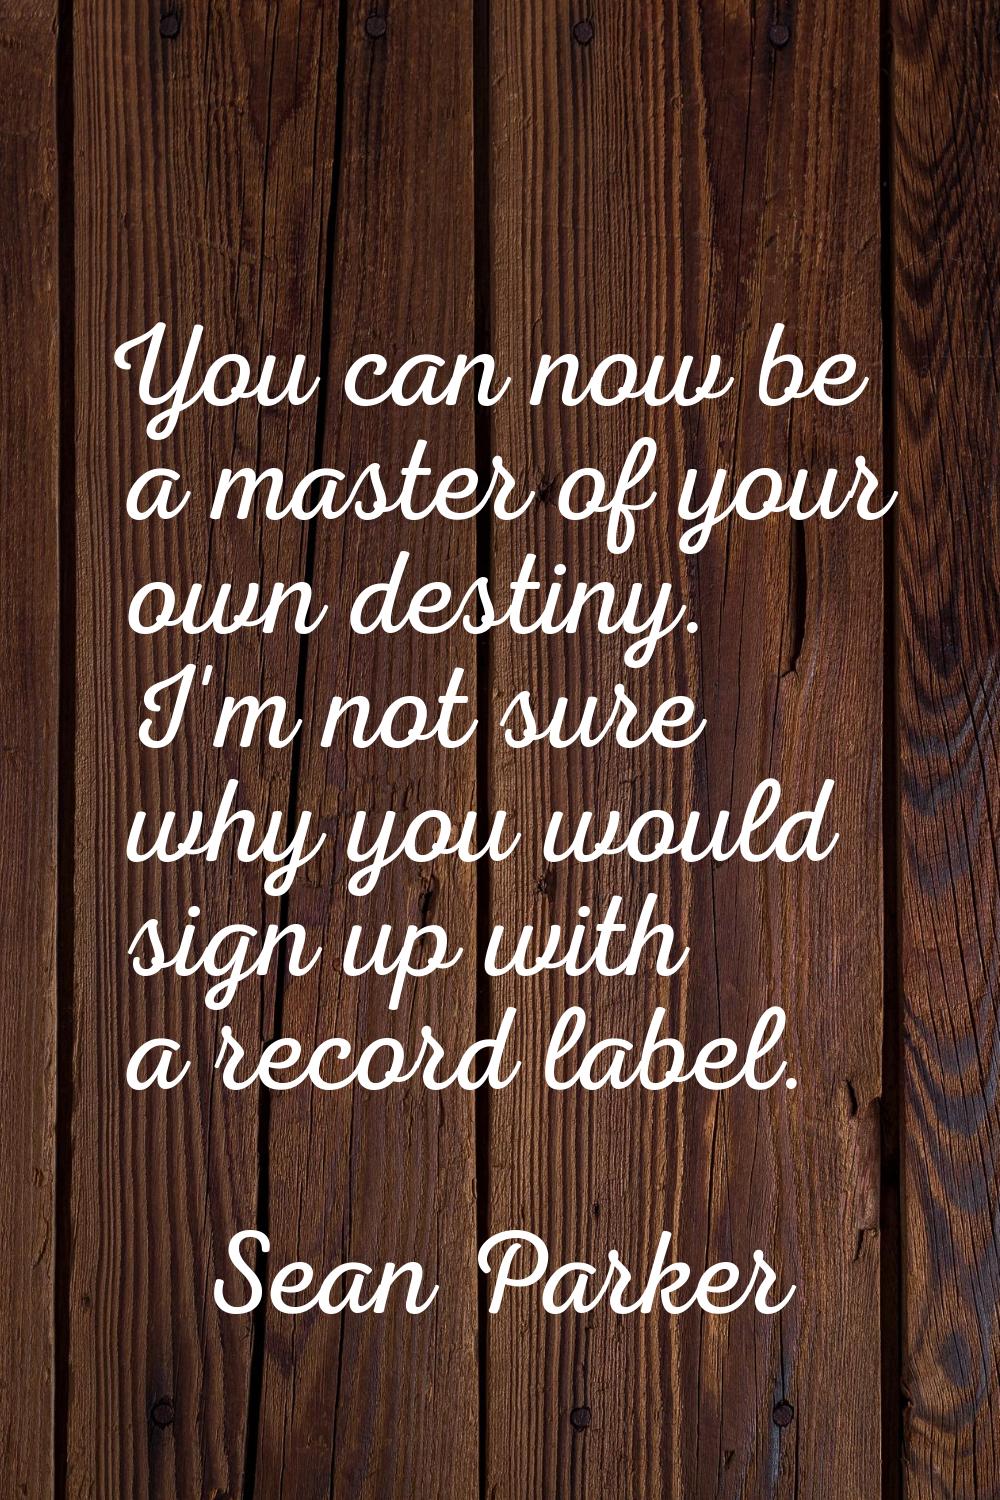 You can now be a master of your own destiny. I'm not sure why you would sign up with a record label